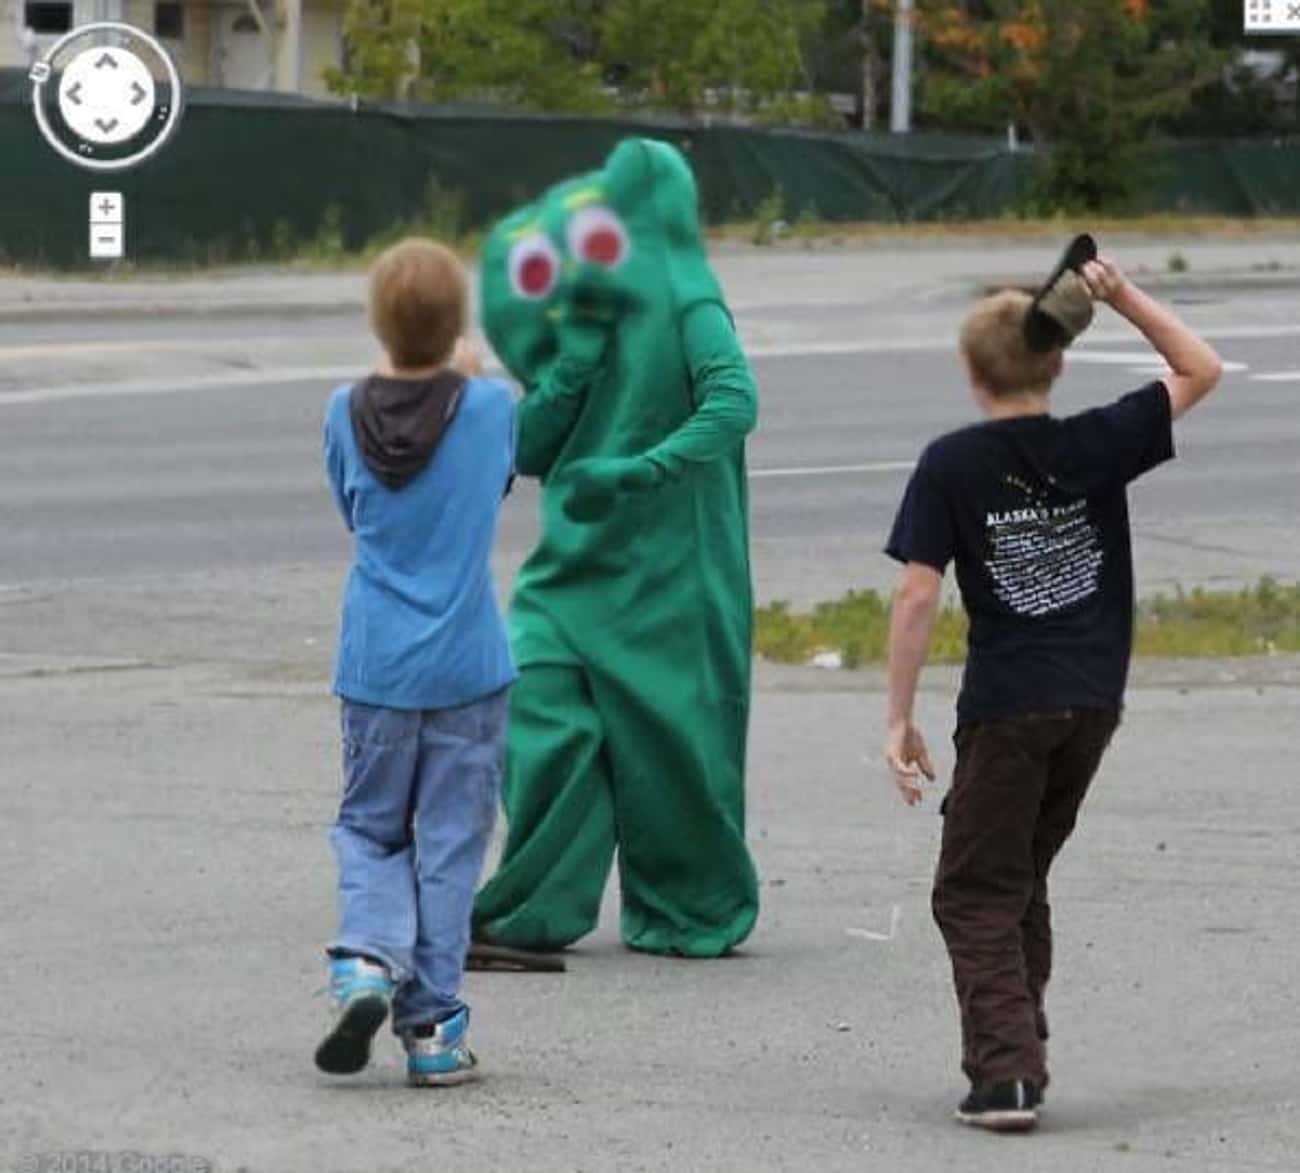 Gumby Attacked on Google Maps